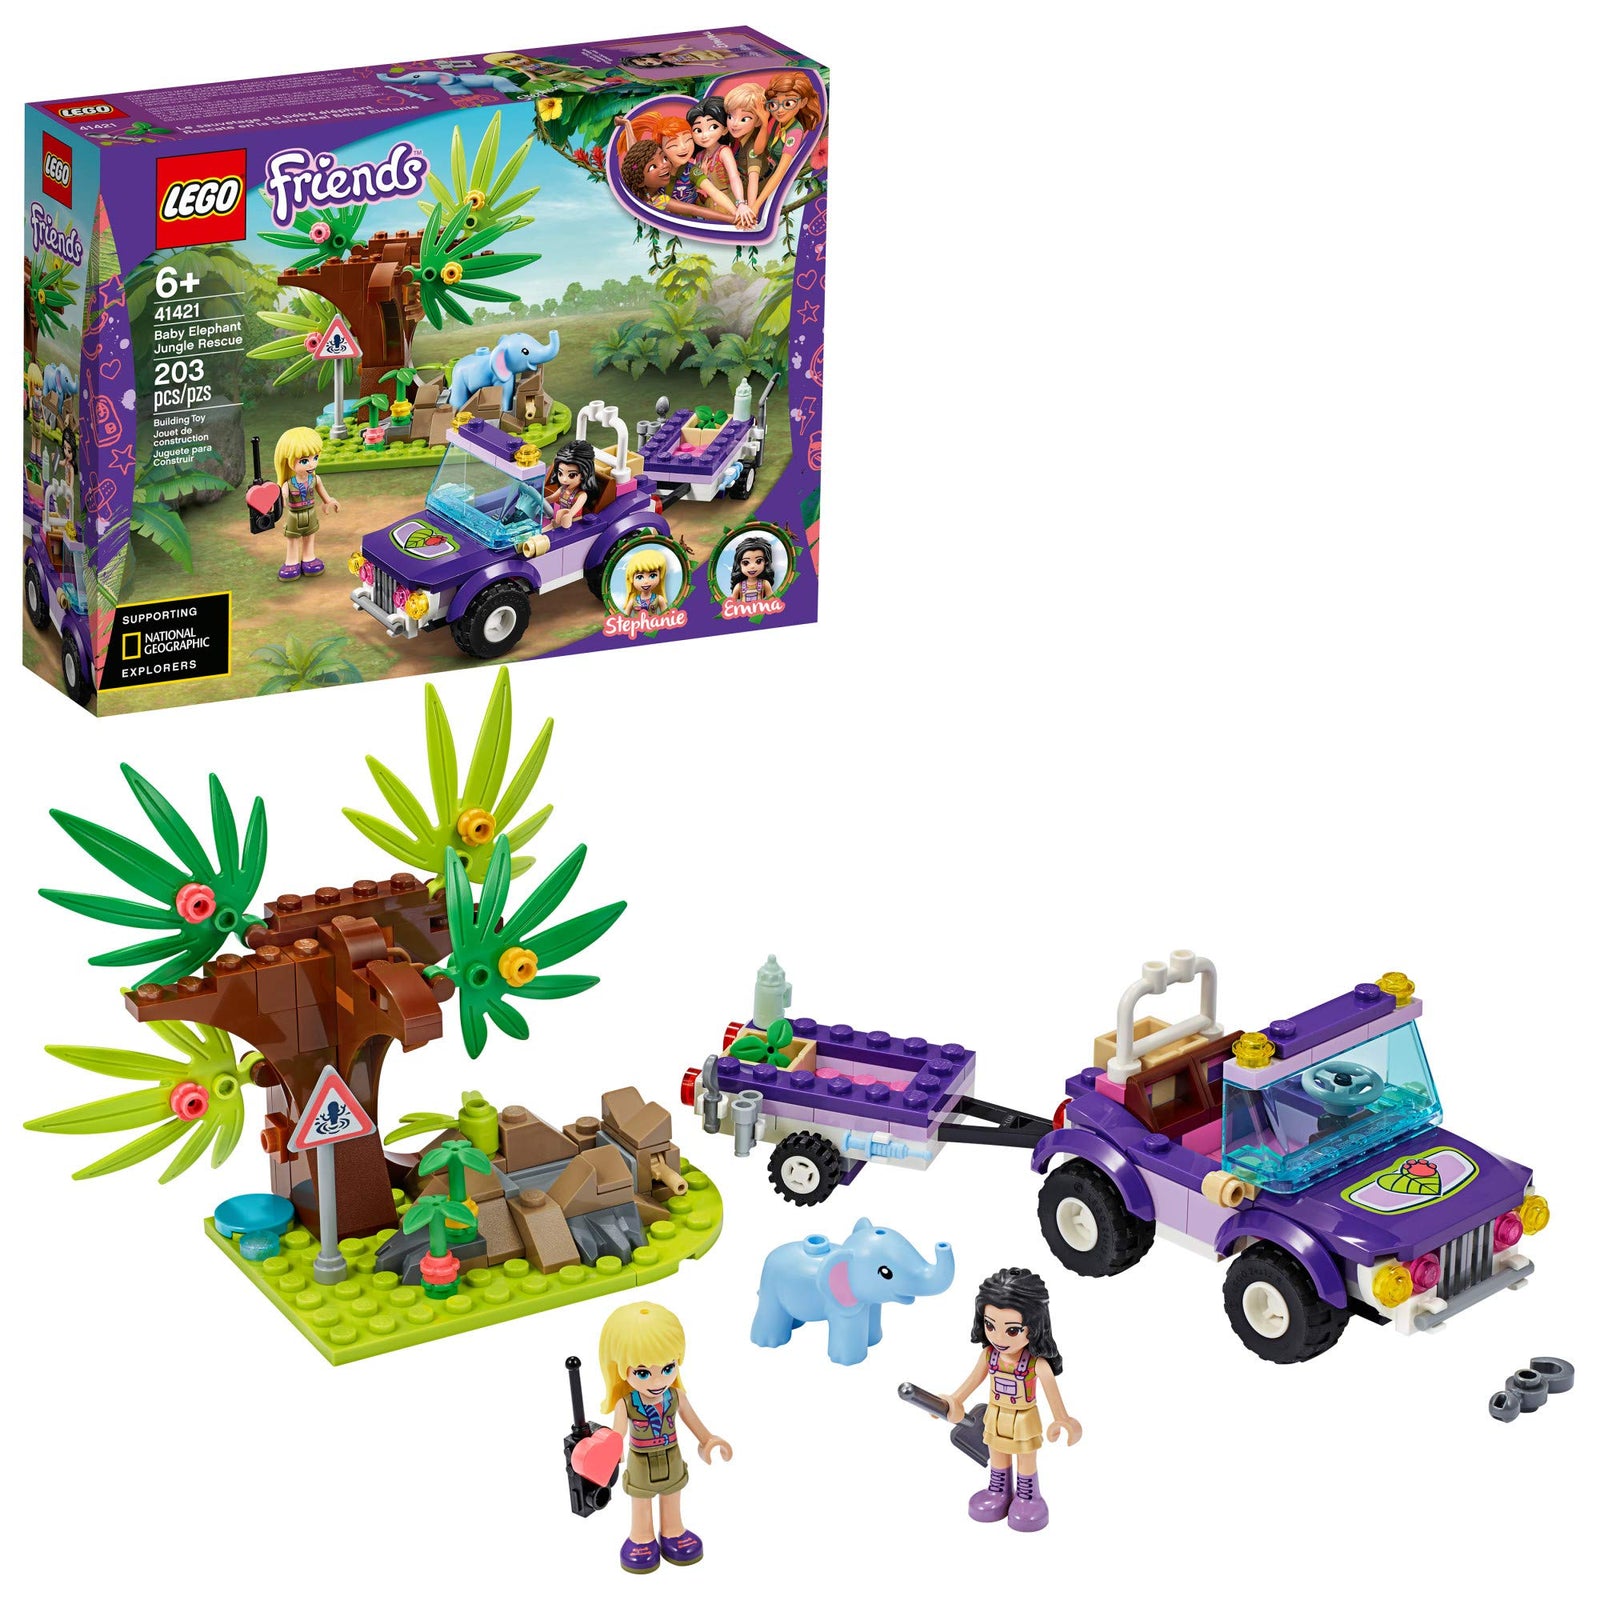 LEGO Friends Baby Elephant Jungle Rescue 41421 Adventure Building Kit; Animal Rescue Playset That Comes with a Toy Truck and Trailer, Plus Friends Emma and Stephanie (203 Pieces)